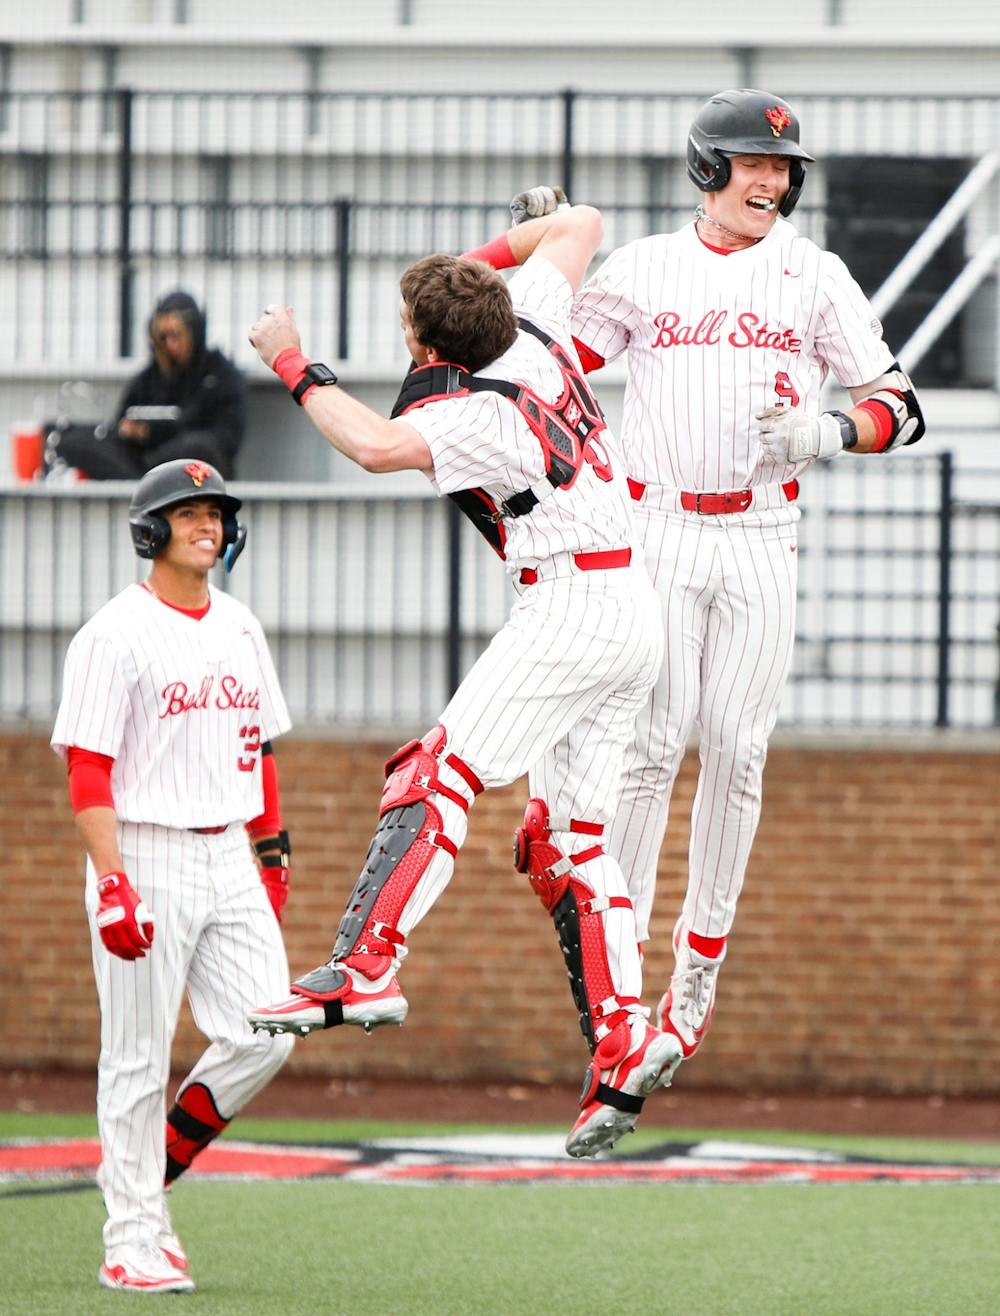 Explosive opening carries Ball State baseball over USI 